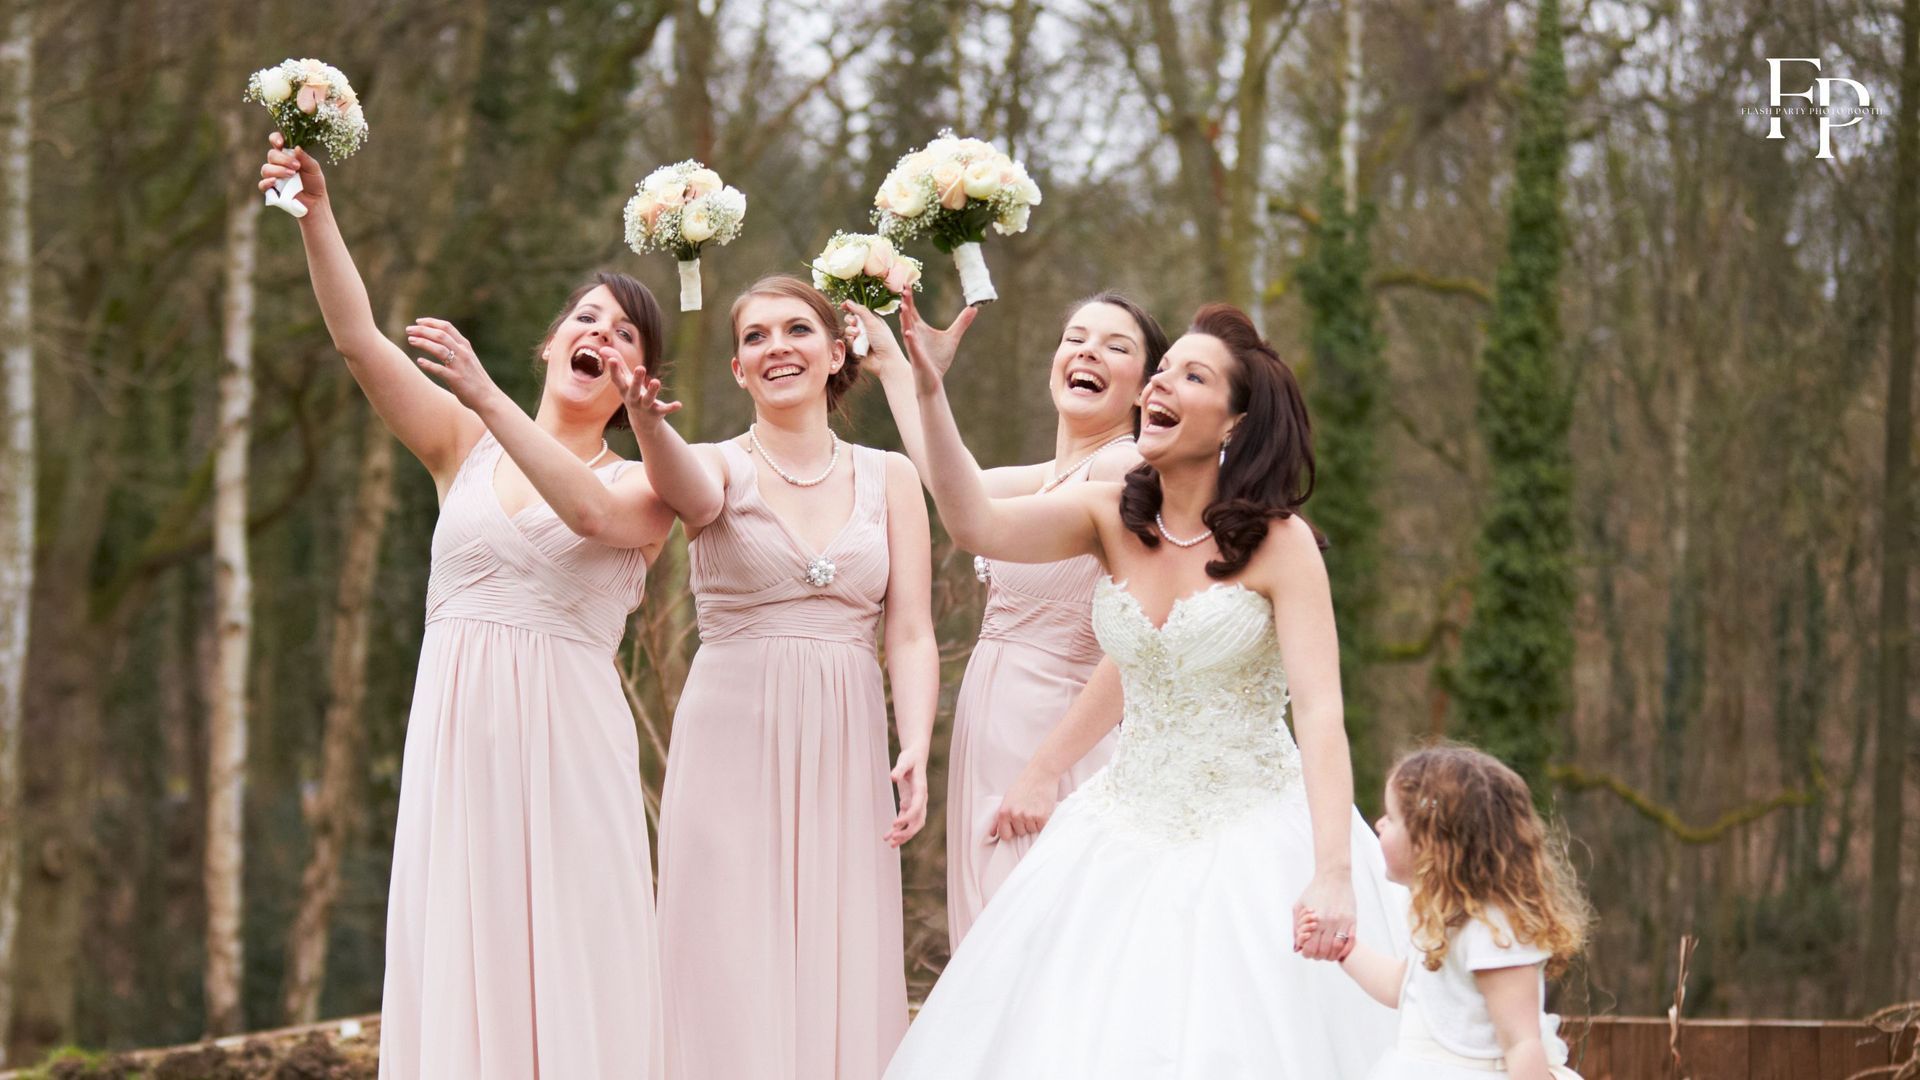 The bride and the bridesmaids at the wedding venue in Manor, having a good time after the wedding ceremony